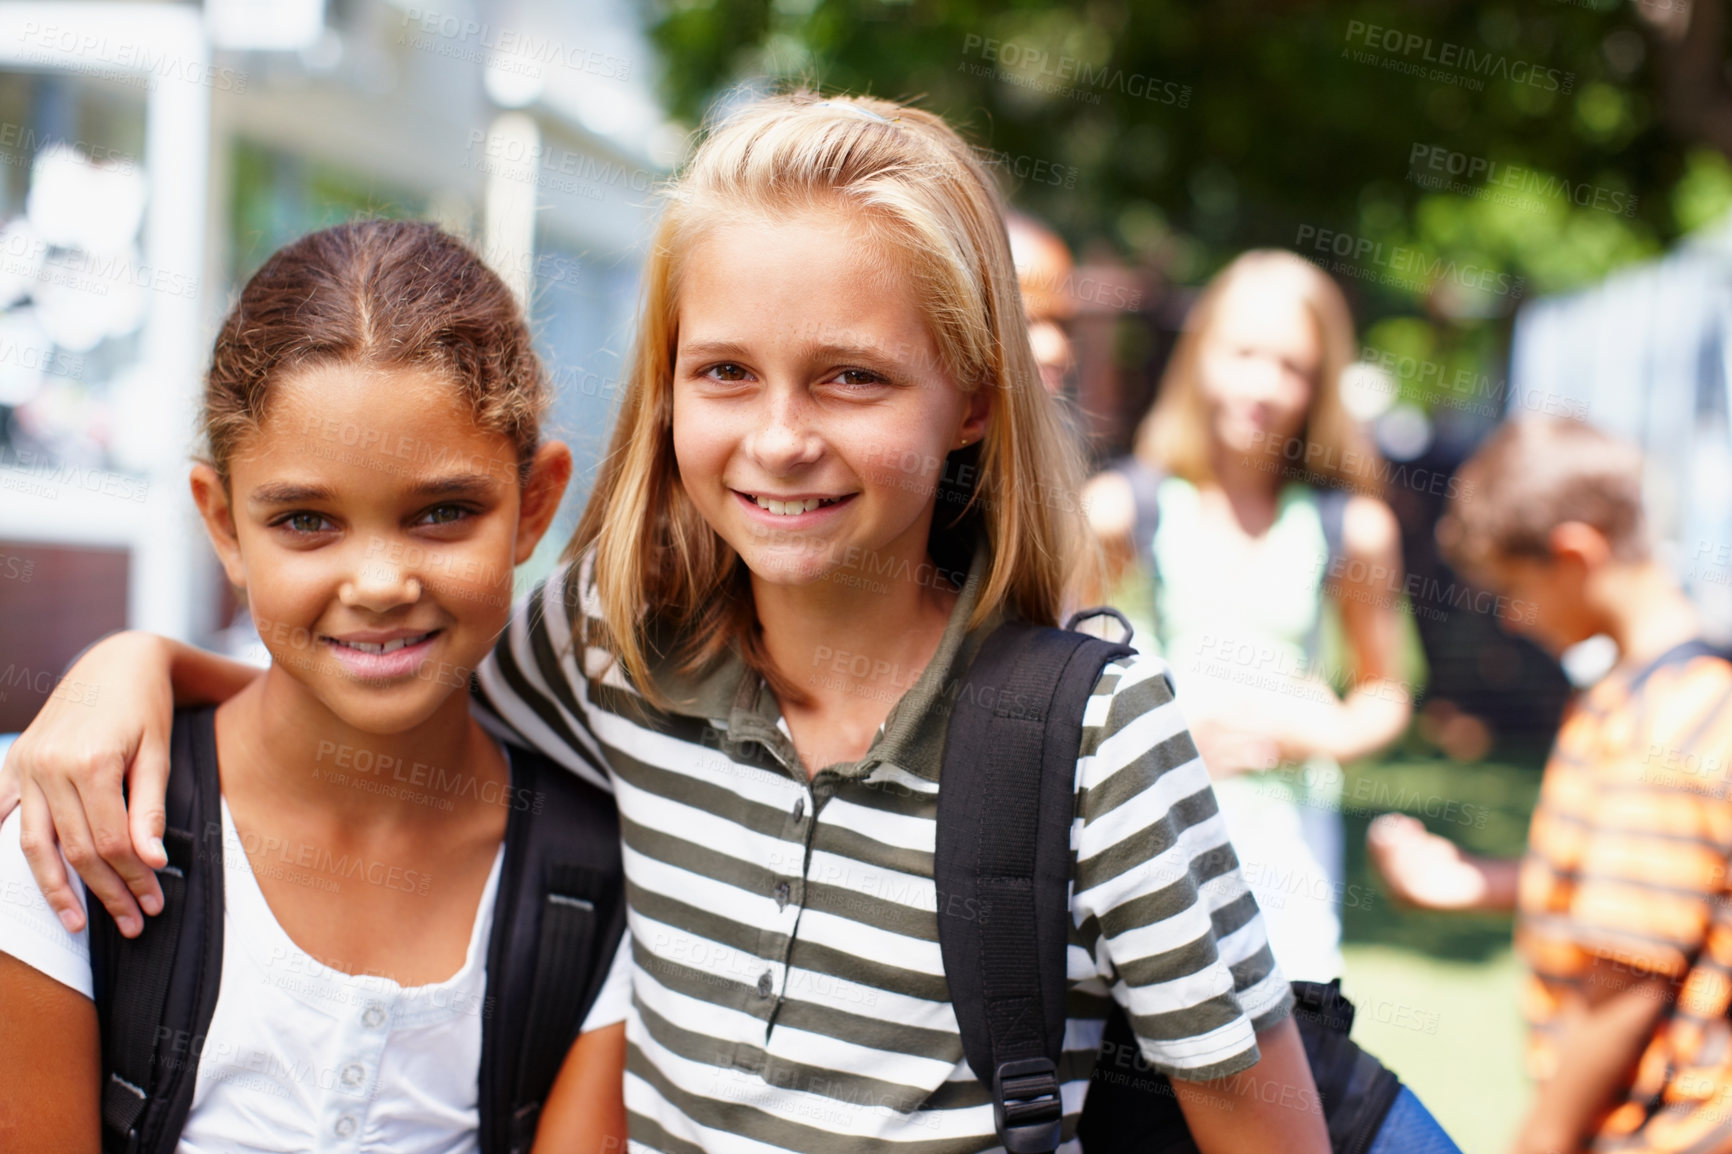 Buy stock photo Multi-racial school friends standing next to each other smiling at the camera - copyspace